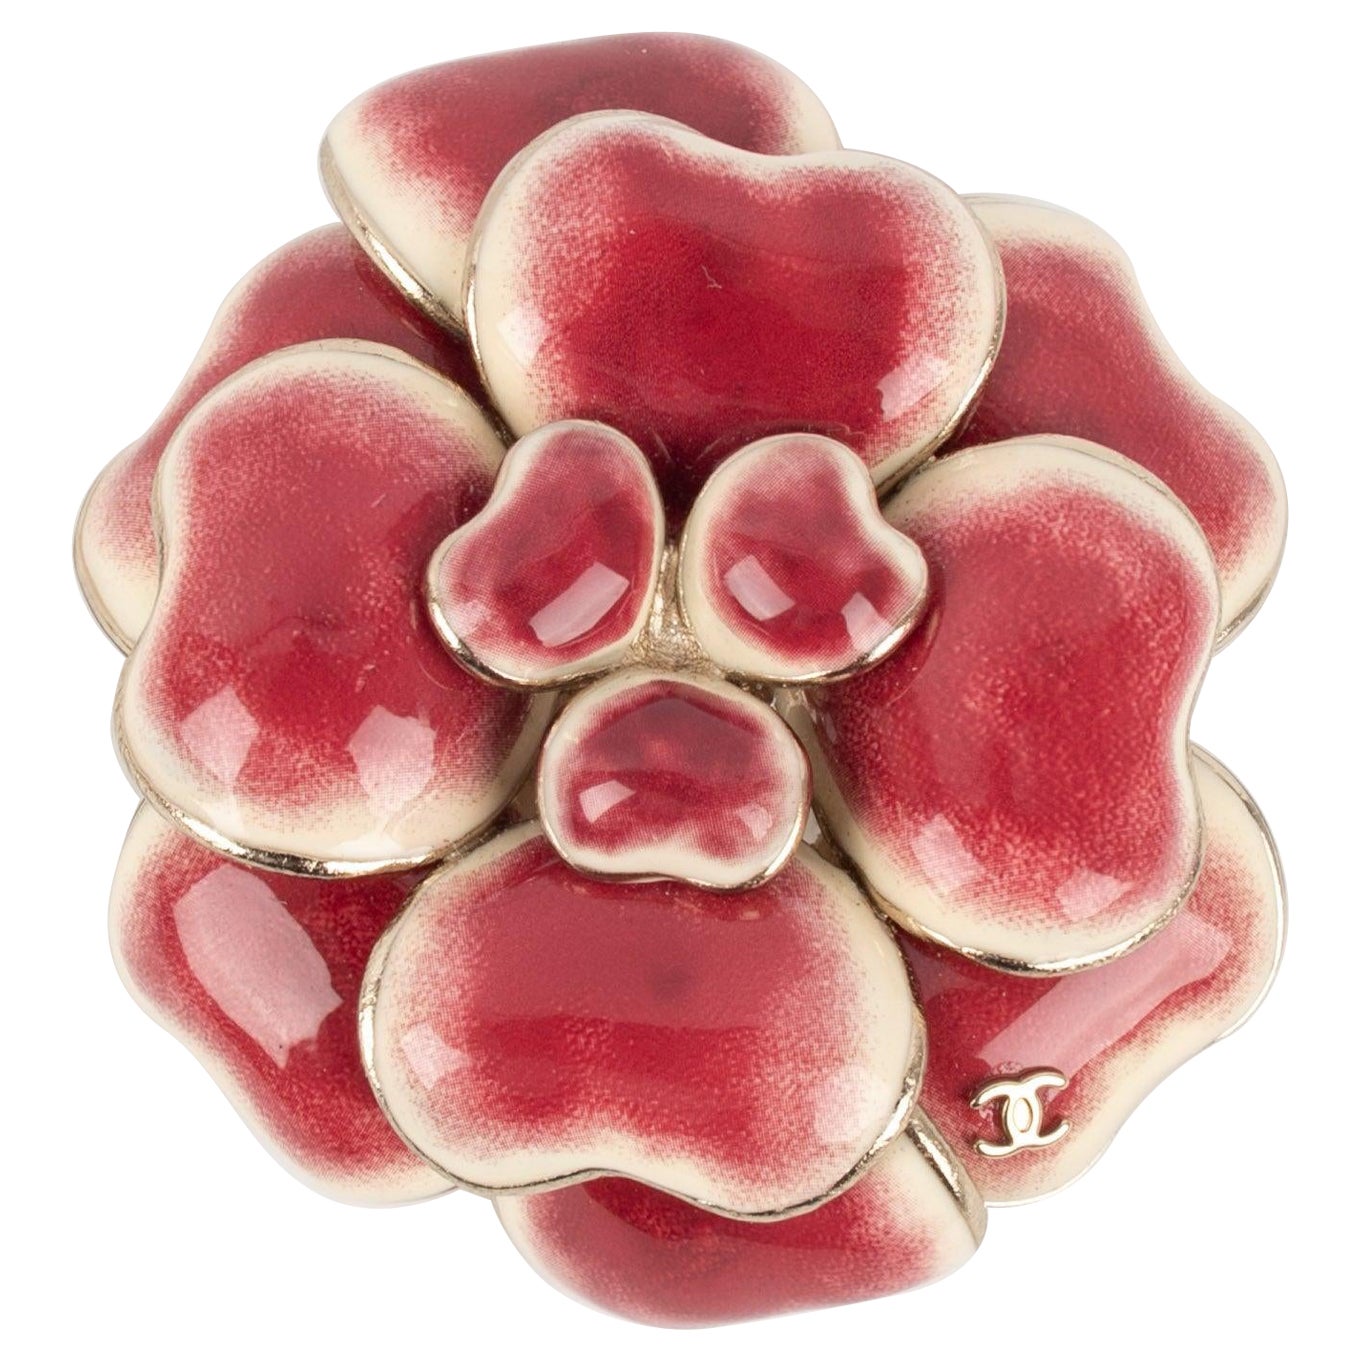 Chanel Pink Camellia Brooch, 2008